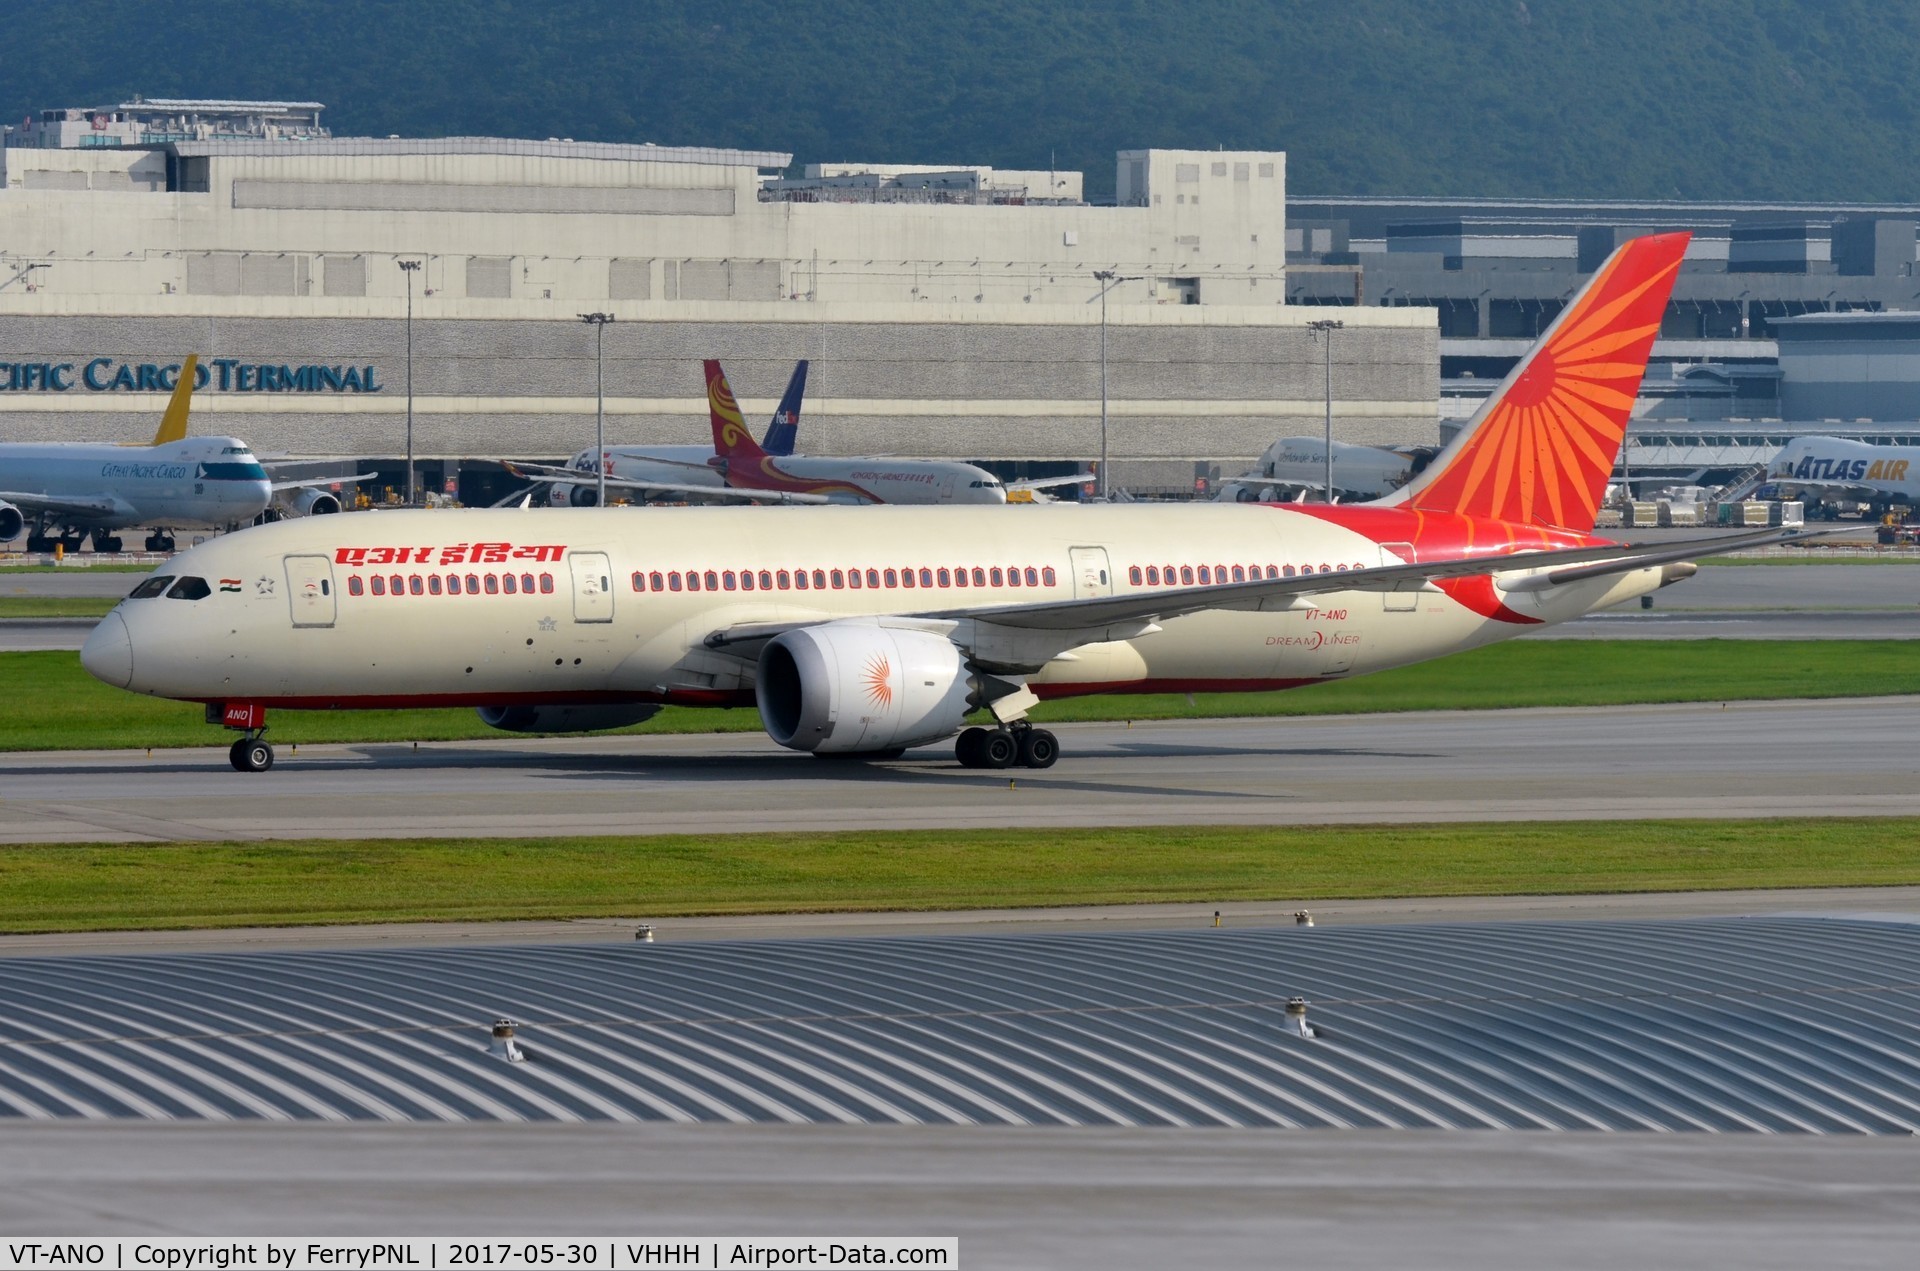 VT-ANO, 2013 Boeing 787-8 Dreamliner C/N 36286, Air India B778 taxying to it's gate.